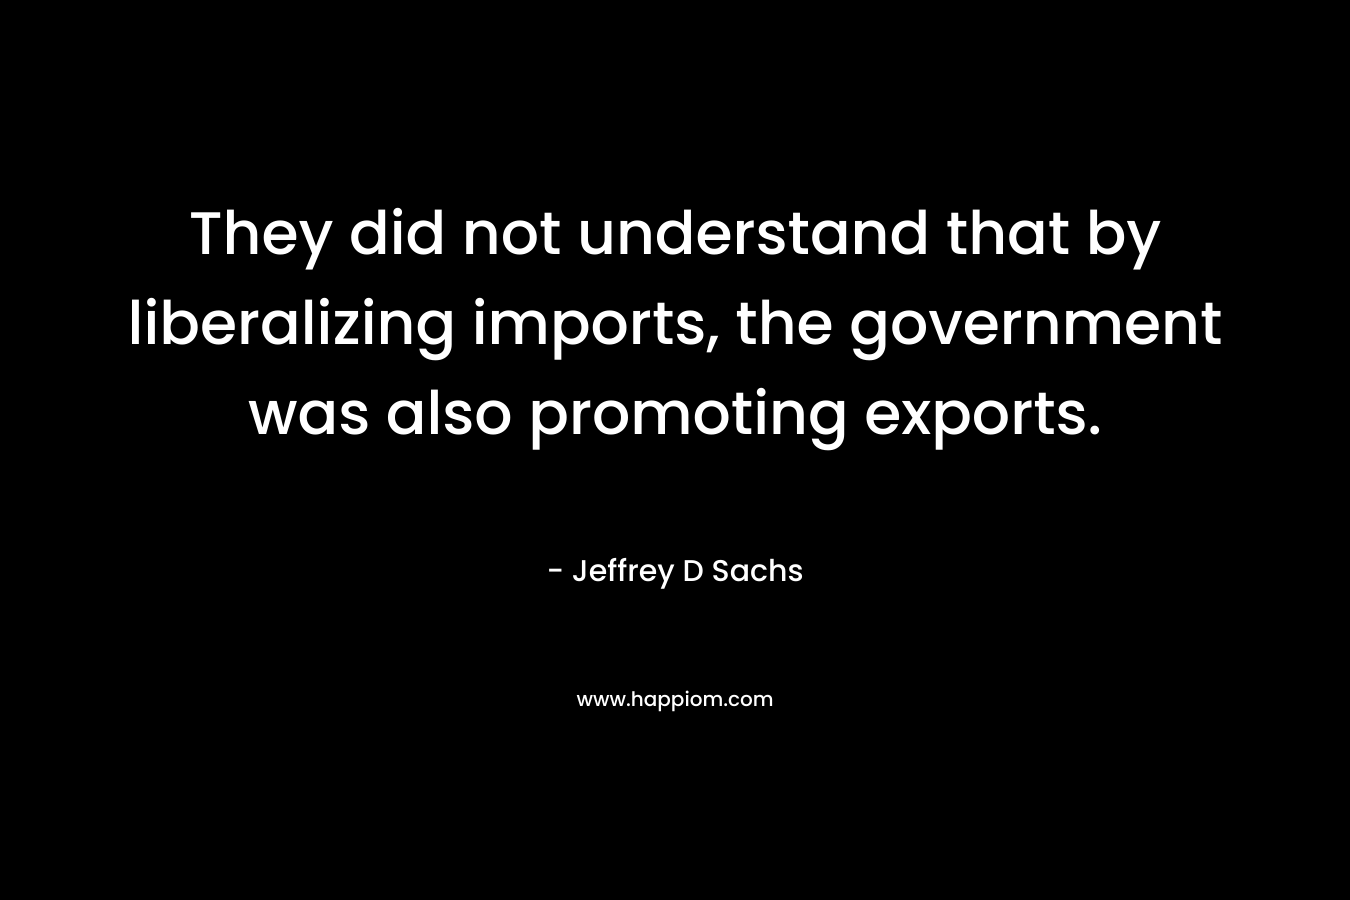 They did not understand that by liberalizing imports, the government was also promoting exports. – Jeffrey D Sachs